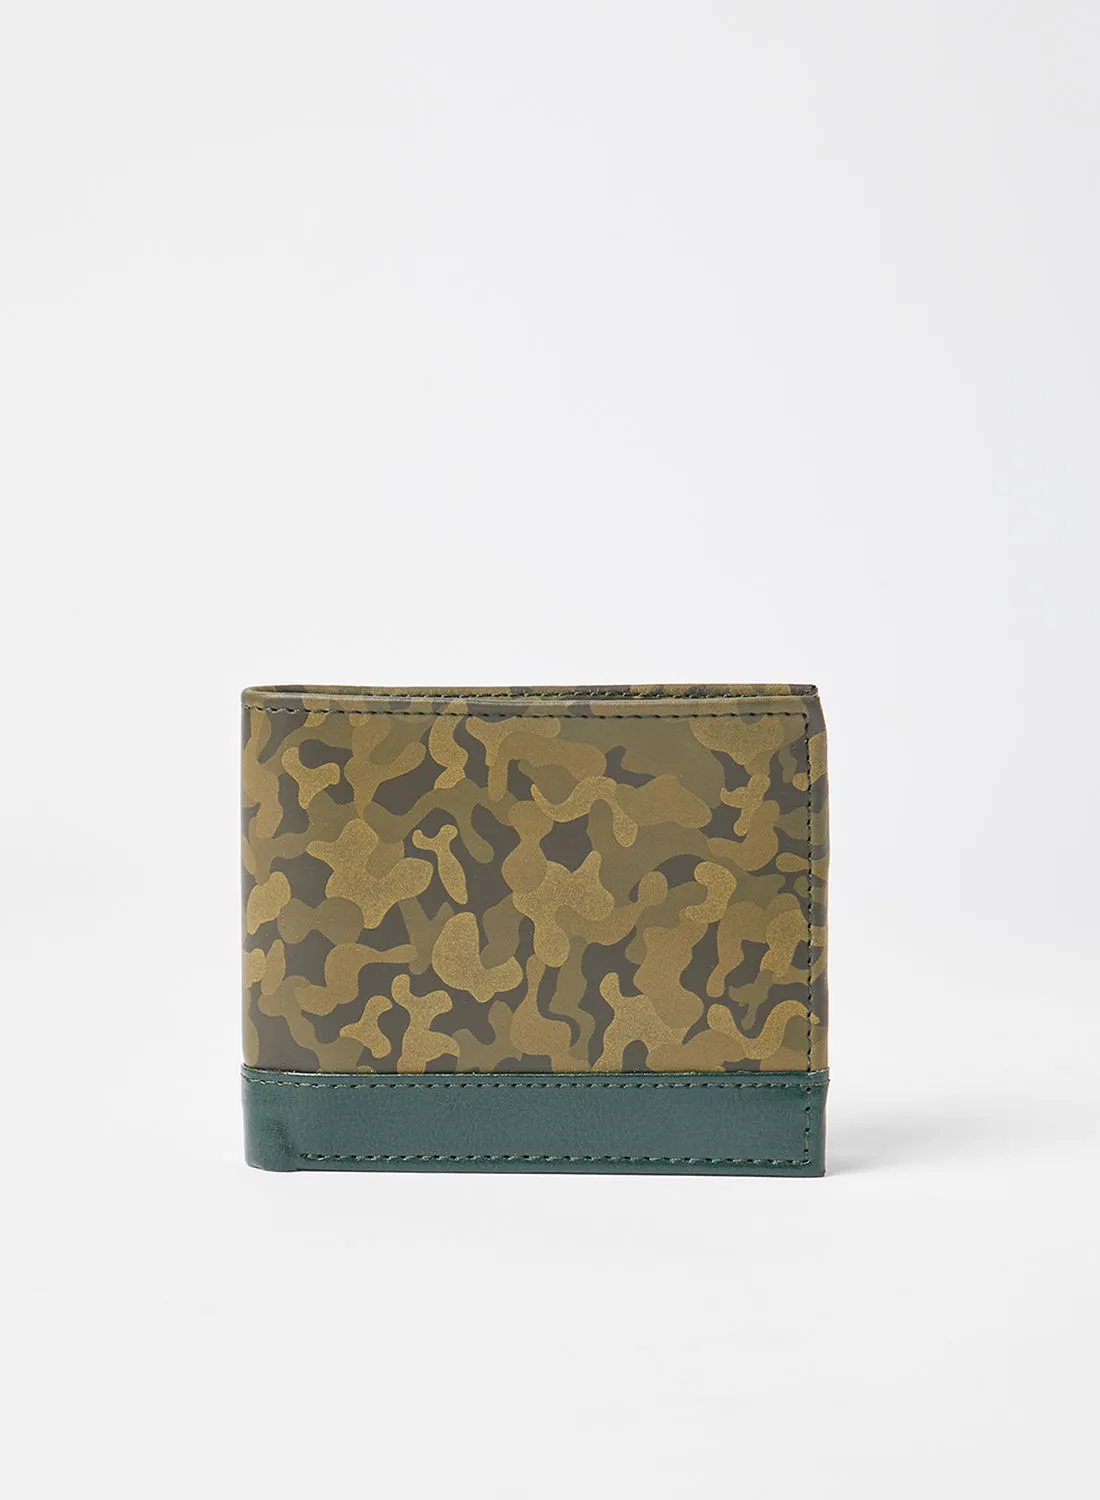 STATE 8 Camouflage Print Wallet Green Multi